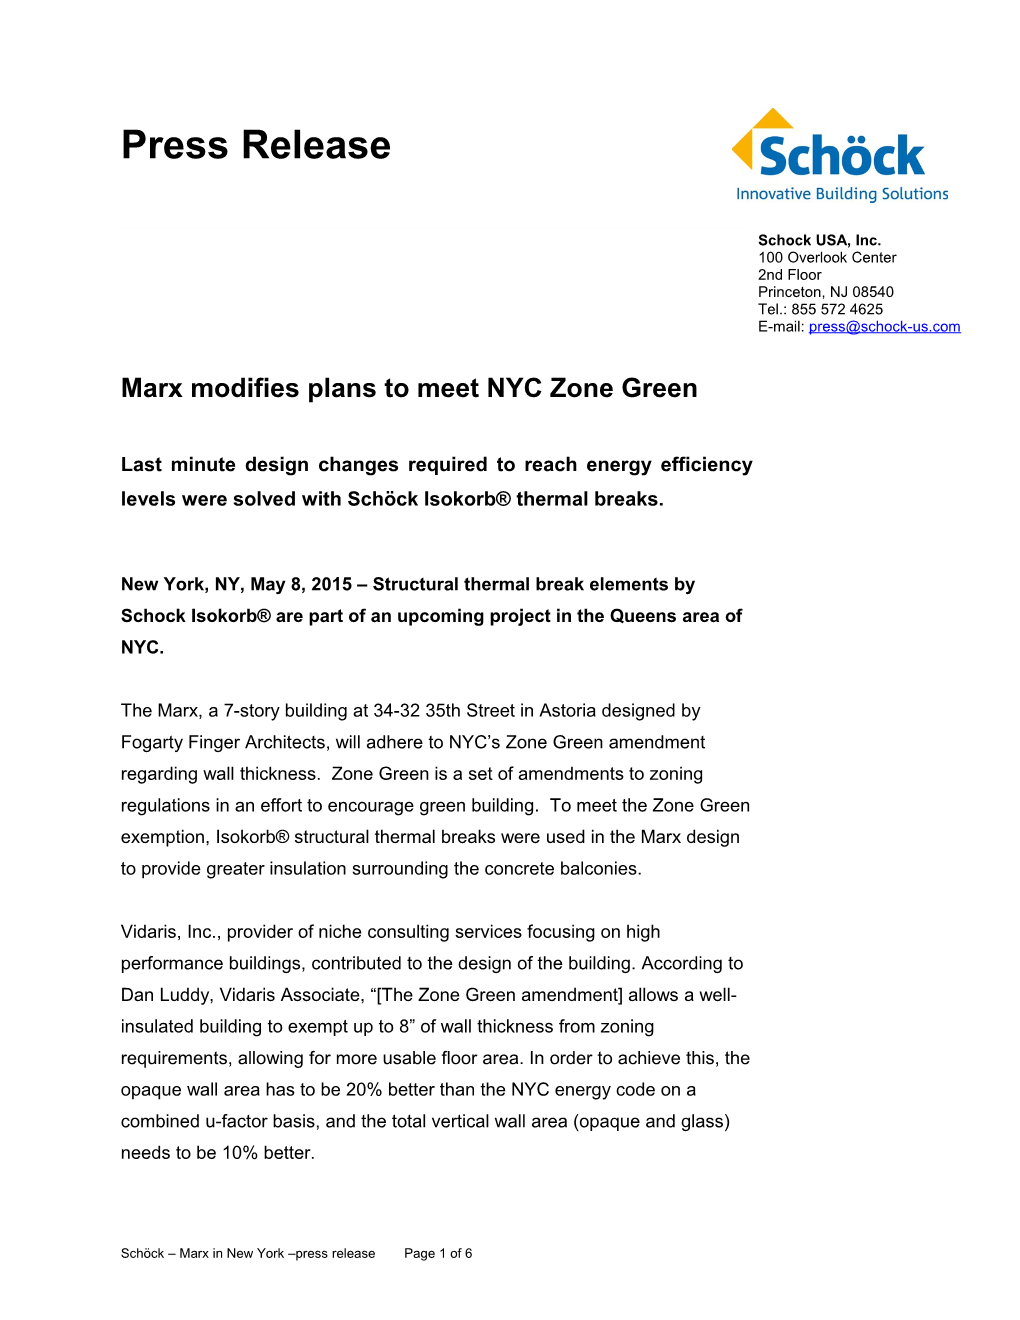 Marx Modifies Plans to Meet NYC Zone Green